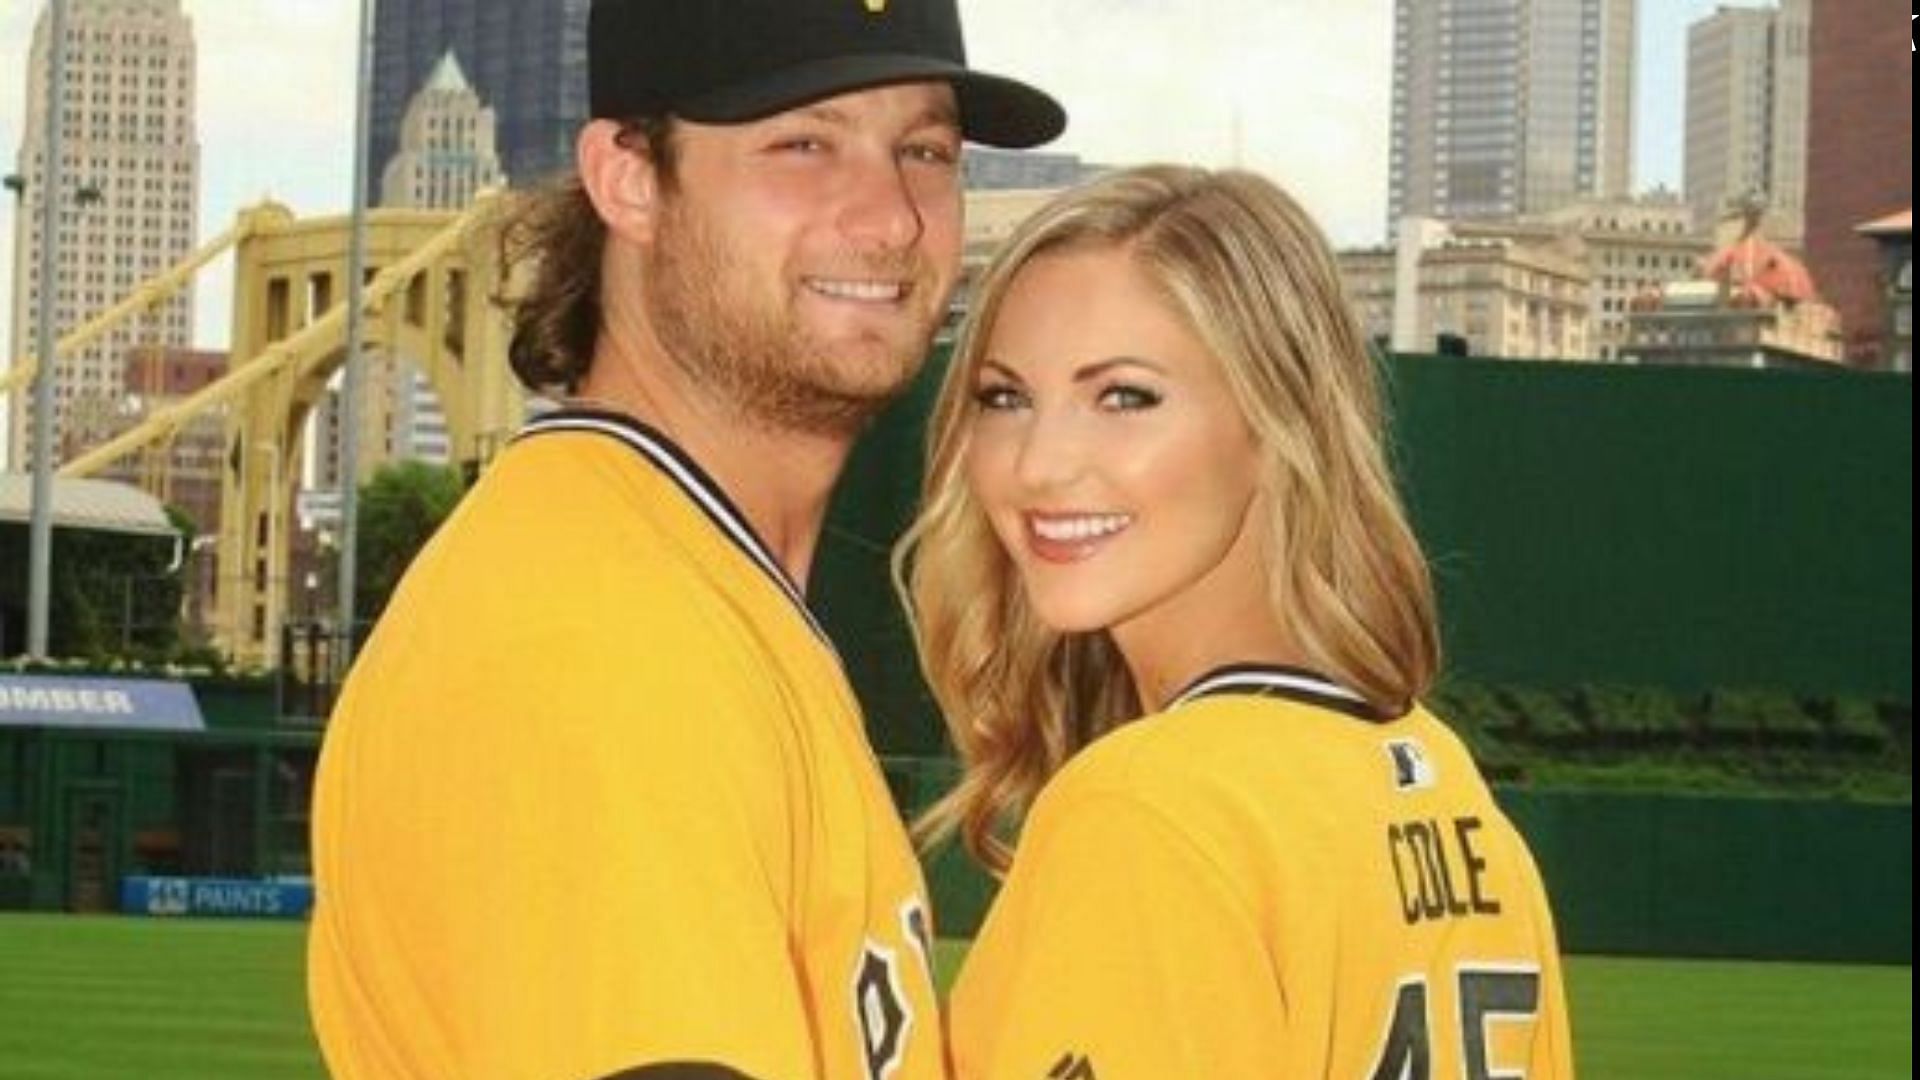 Gerrit Cole: Fans buzz over Gerrit Cole's wife, Amy's summertime pics  featuring Brandon Crawford and Kate Upton